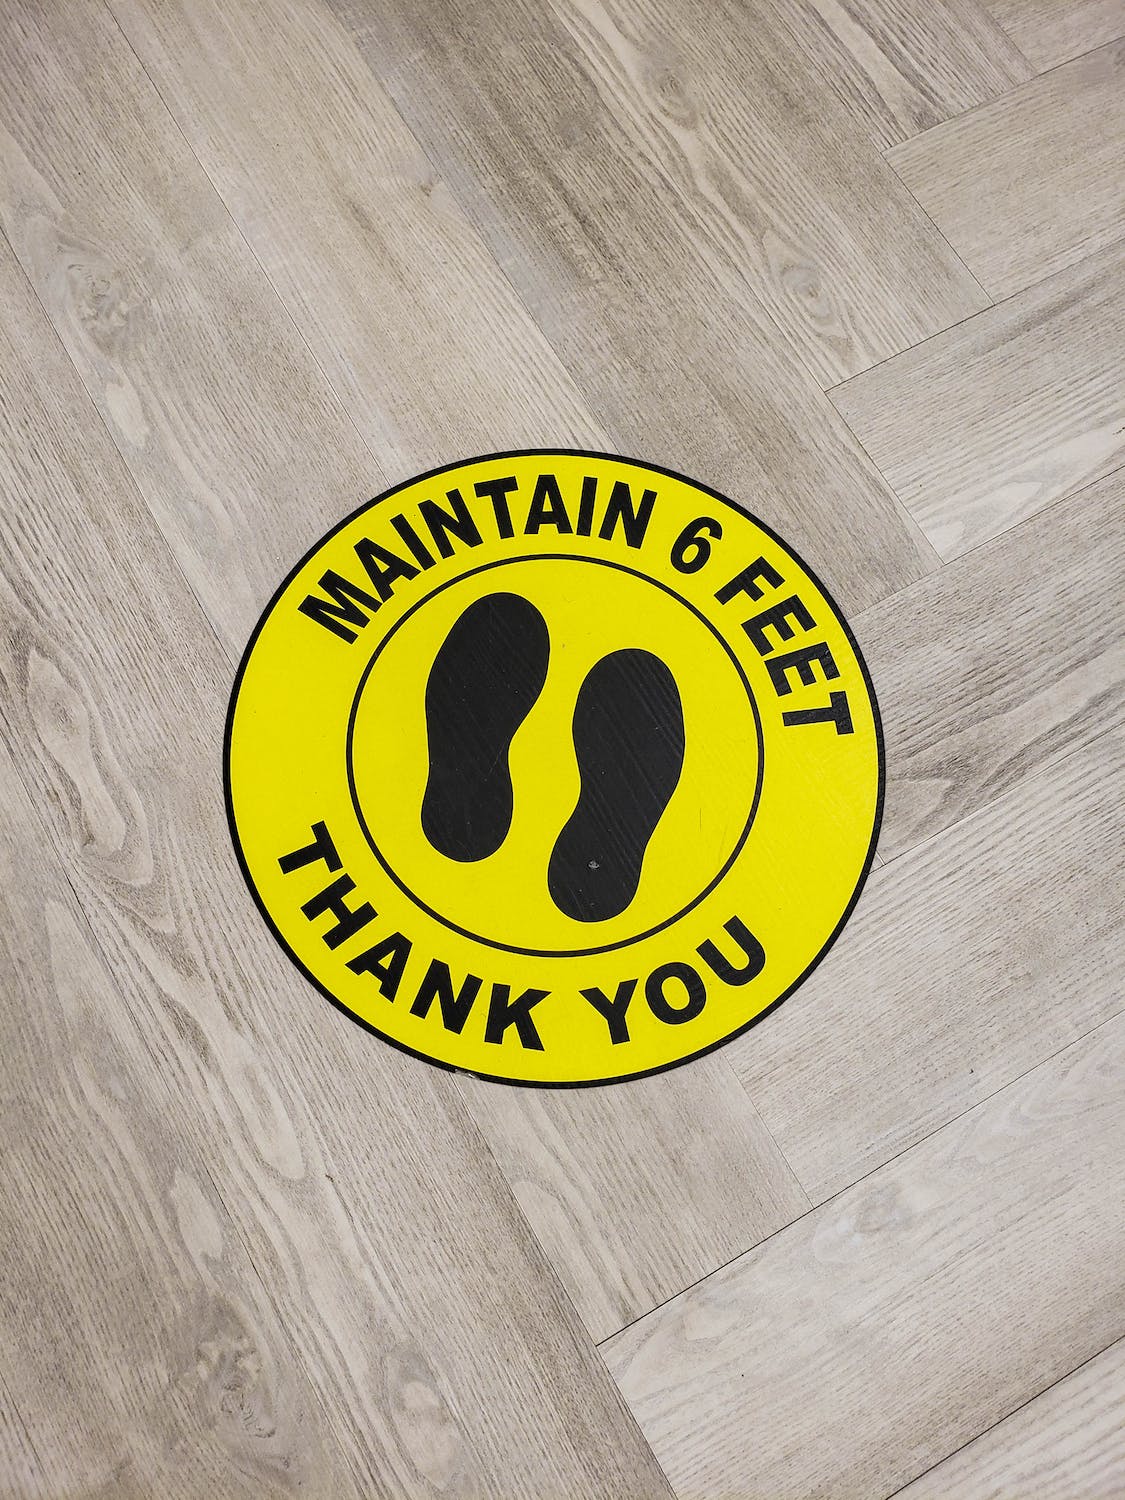 Marketing Strategies With Removable Floor Decals For Businesses